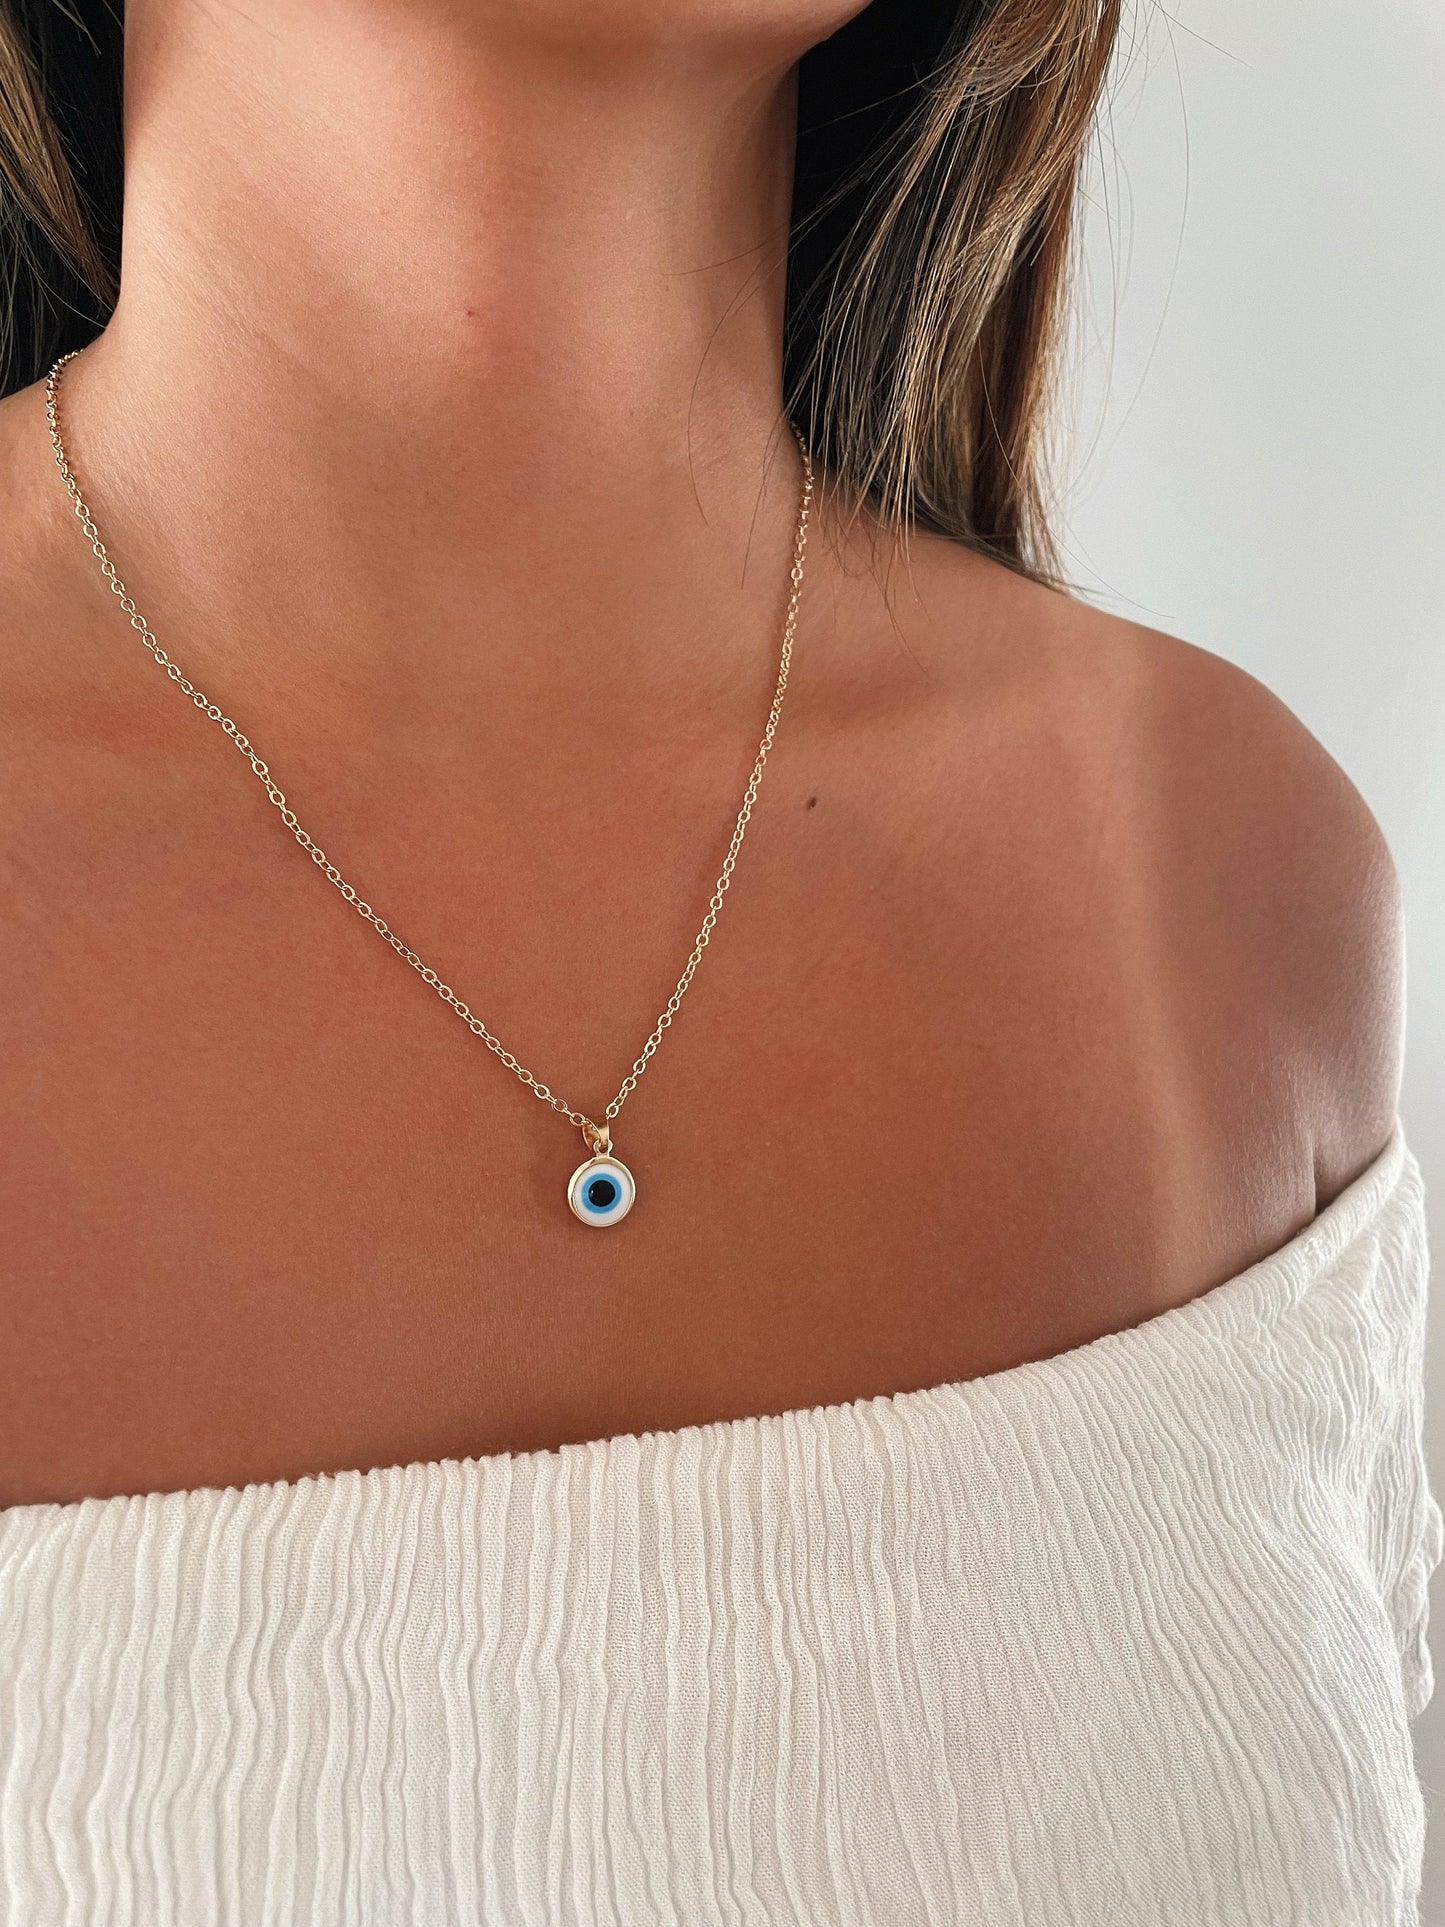 EVIL EYE NECKLACE, Round Rainbow Blue Eye Pendant, Protection Necklace for Women, Bridesmaid Jewelry, Gift for Her